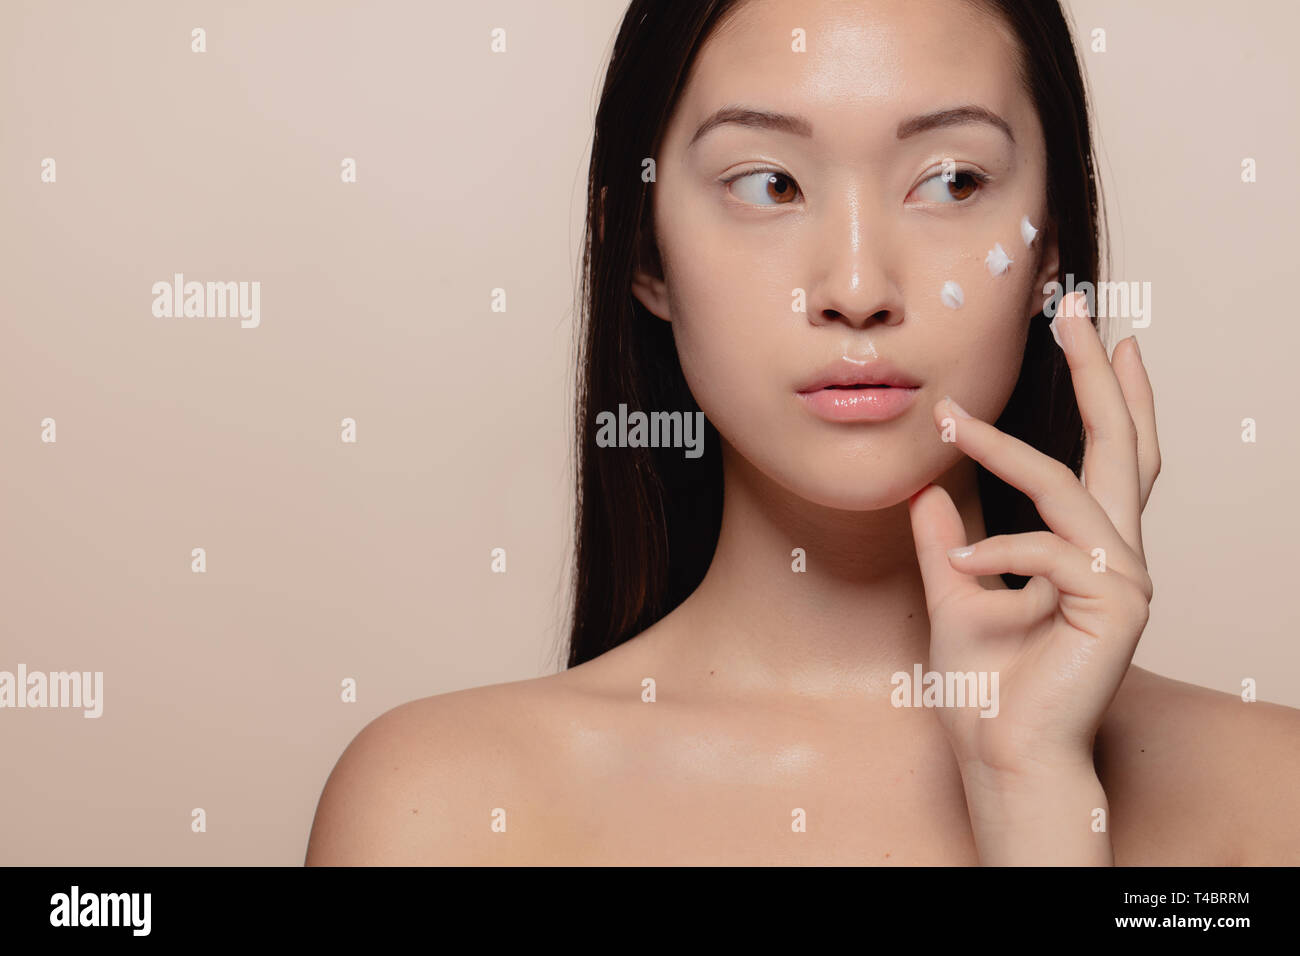 Close up of a beautiful young woman applying moisturizer to her face. Asian female model putting cosmetic cream on her face and looking away. Stock Photo